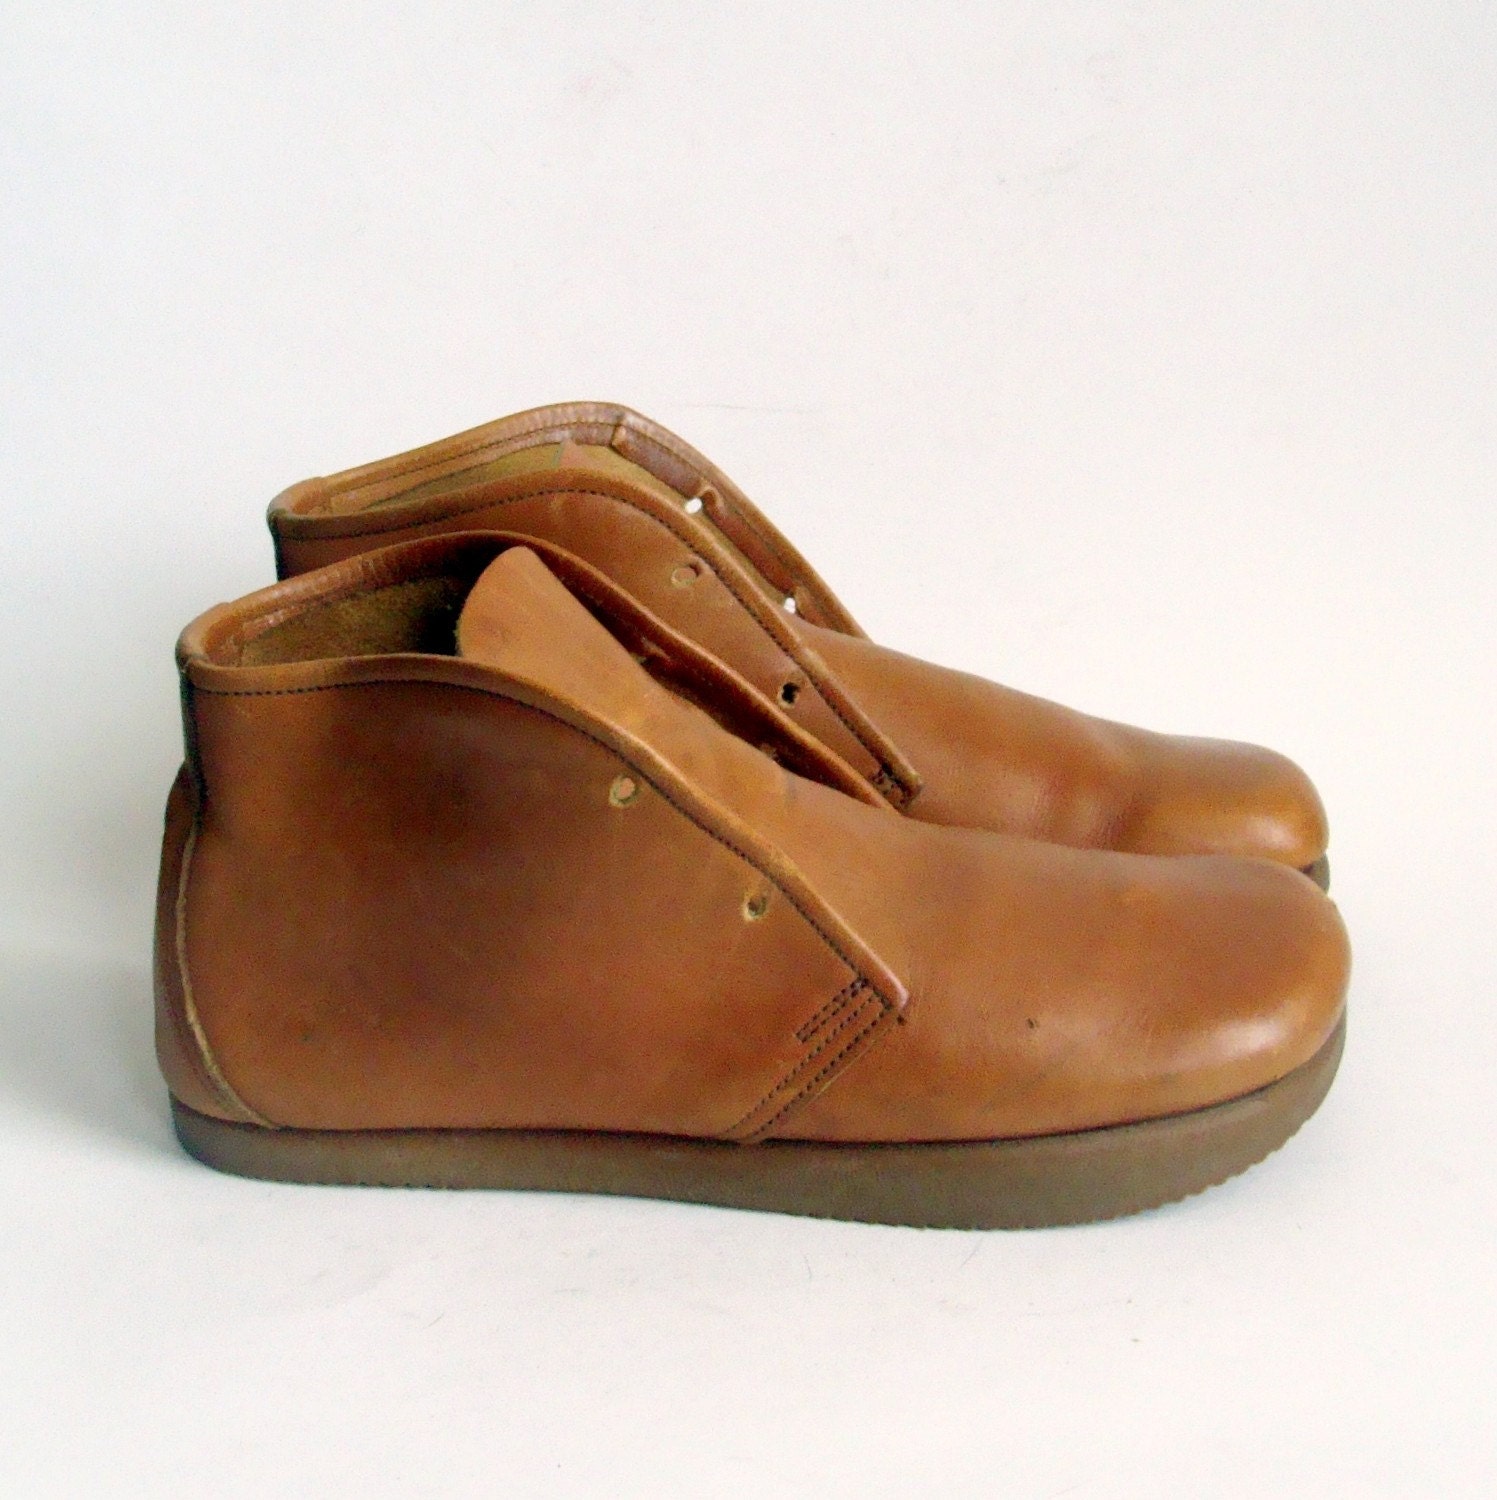 size 7 Vtg Golden Brown Lace Up CHUKKA Boot. 70s earth shoe.